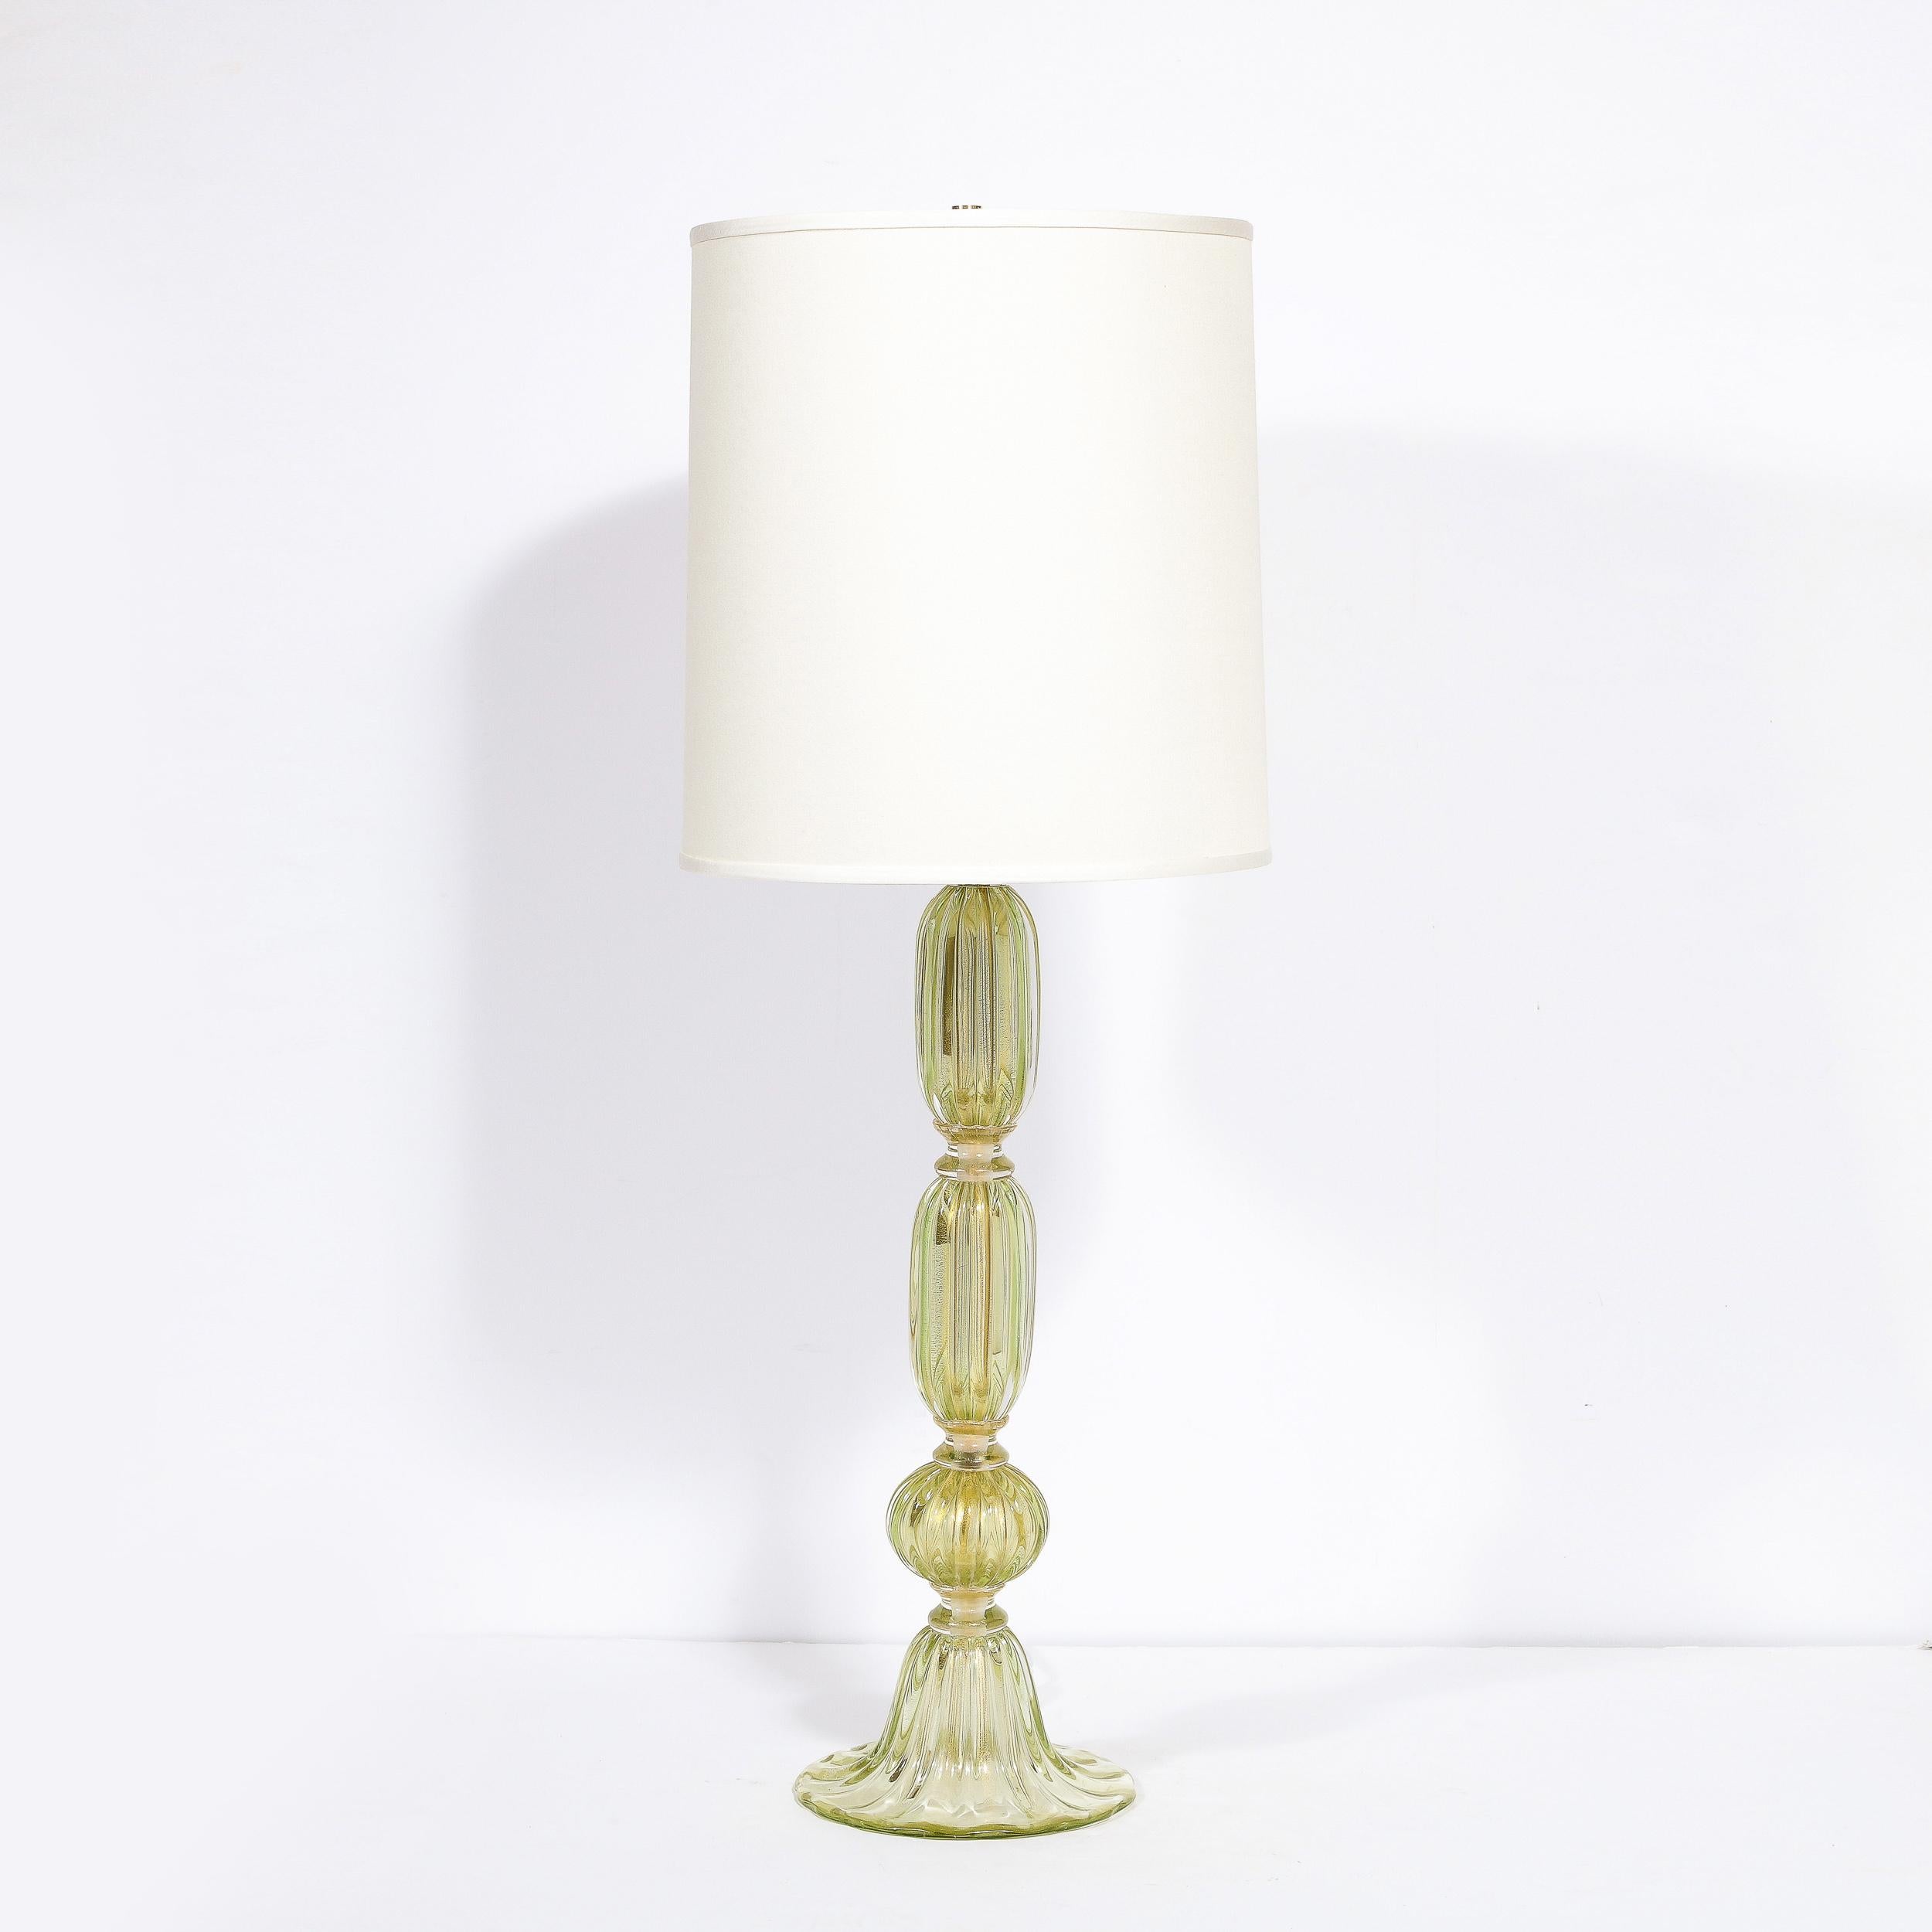 This dramatic and elegant table lamp was handblown in Murano, Italy- the island off the coast of Venice renowned for centuries for its superlative glass production. It features a sculptural undulating cylindrical body in handblown translucent reeded